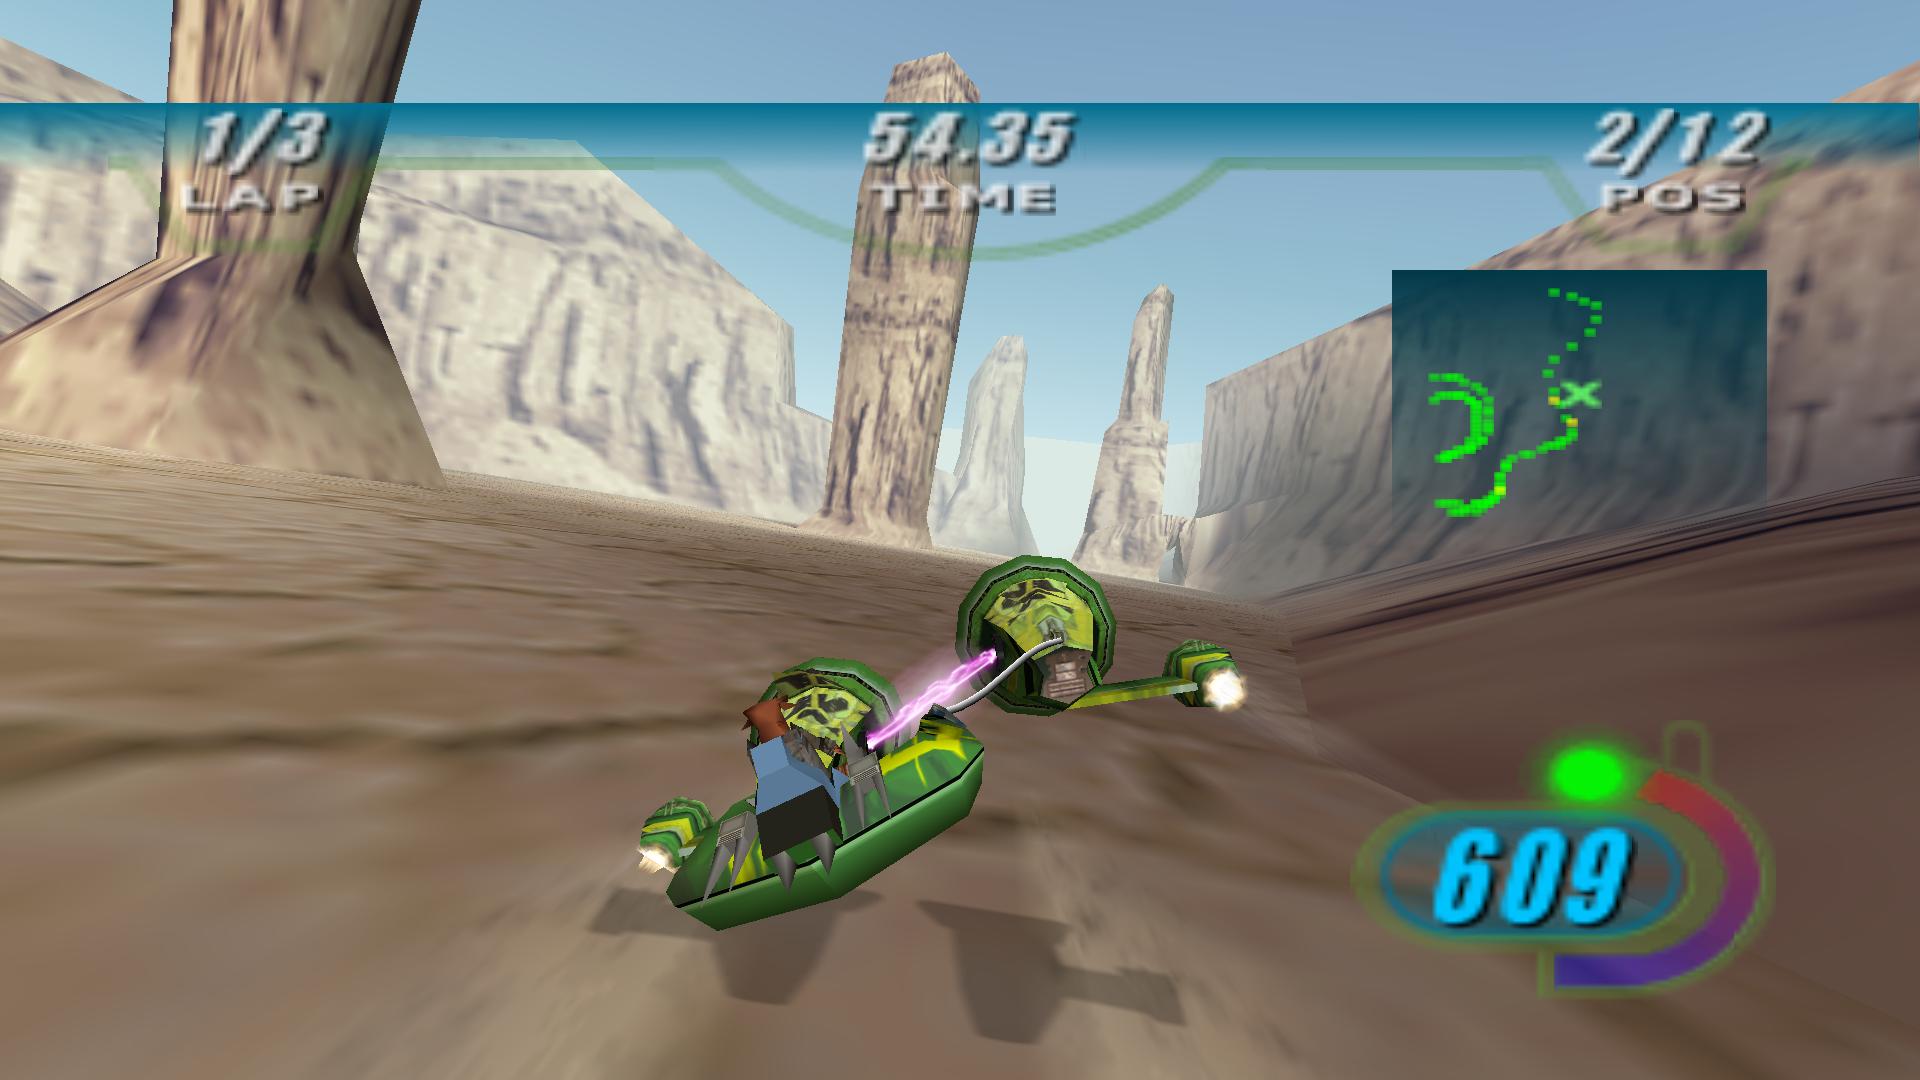 Star Wars Episode 1: Racer Comes To Nintendo Switch And PlayStation 4 Next Tuesday, June 23